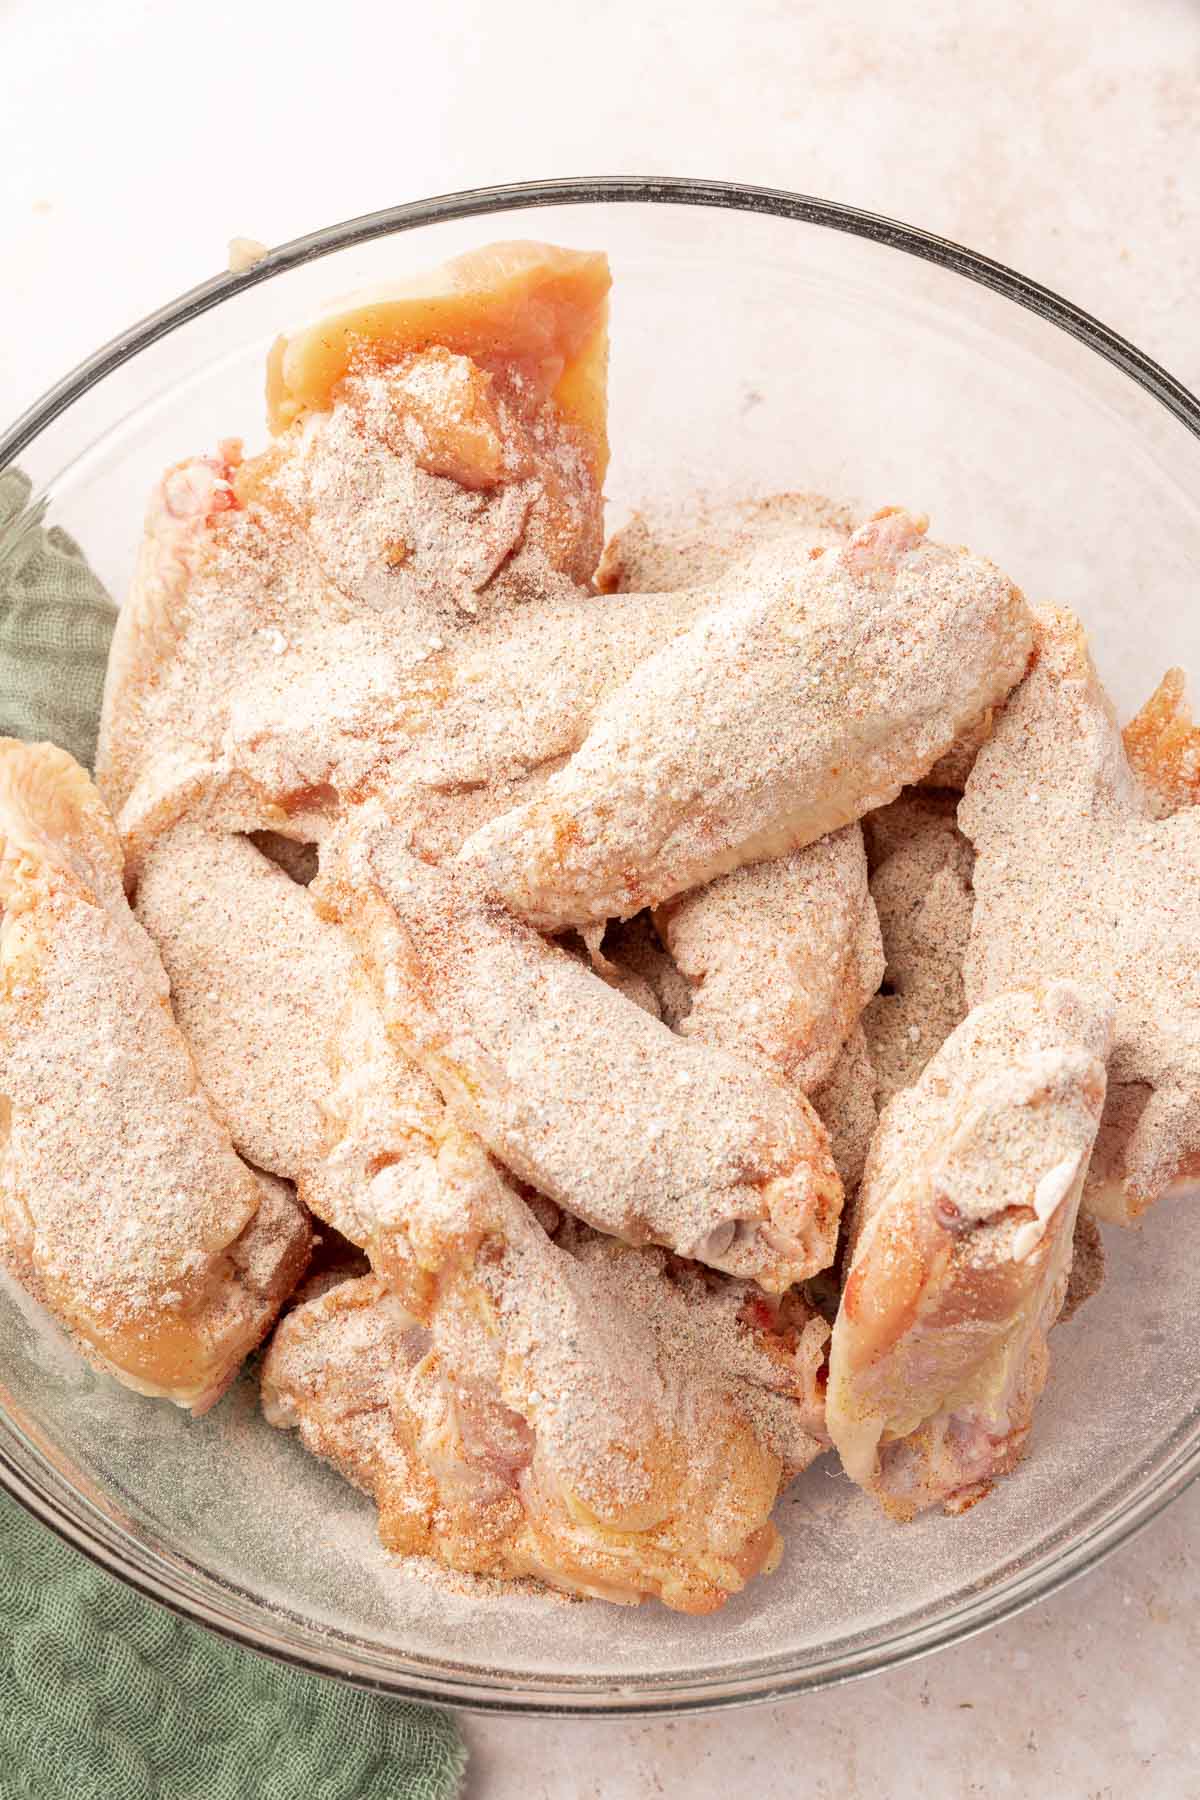 A glass mixing bowl with raw chicken wings topped with a mixture of baking powder and spices.